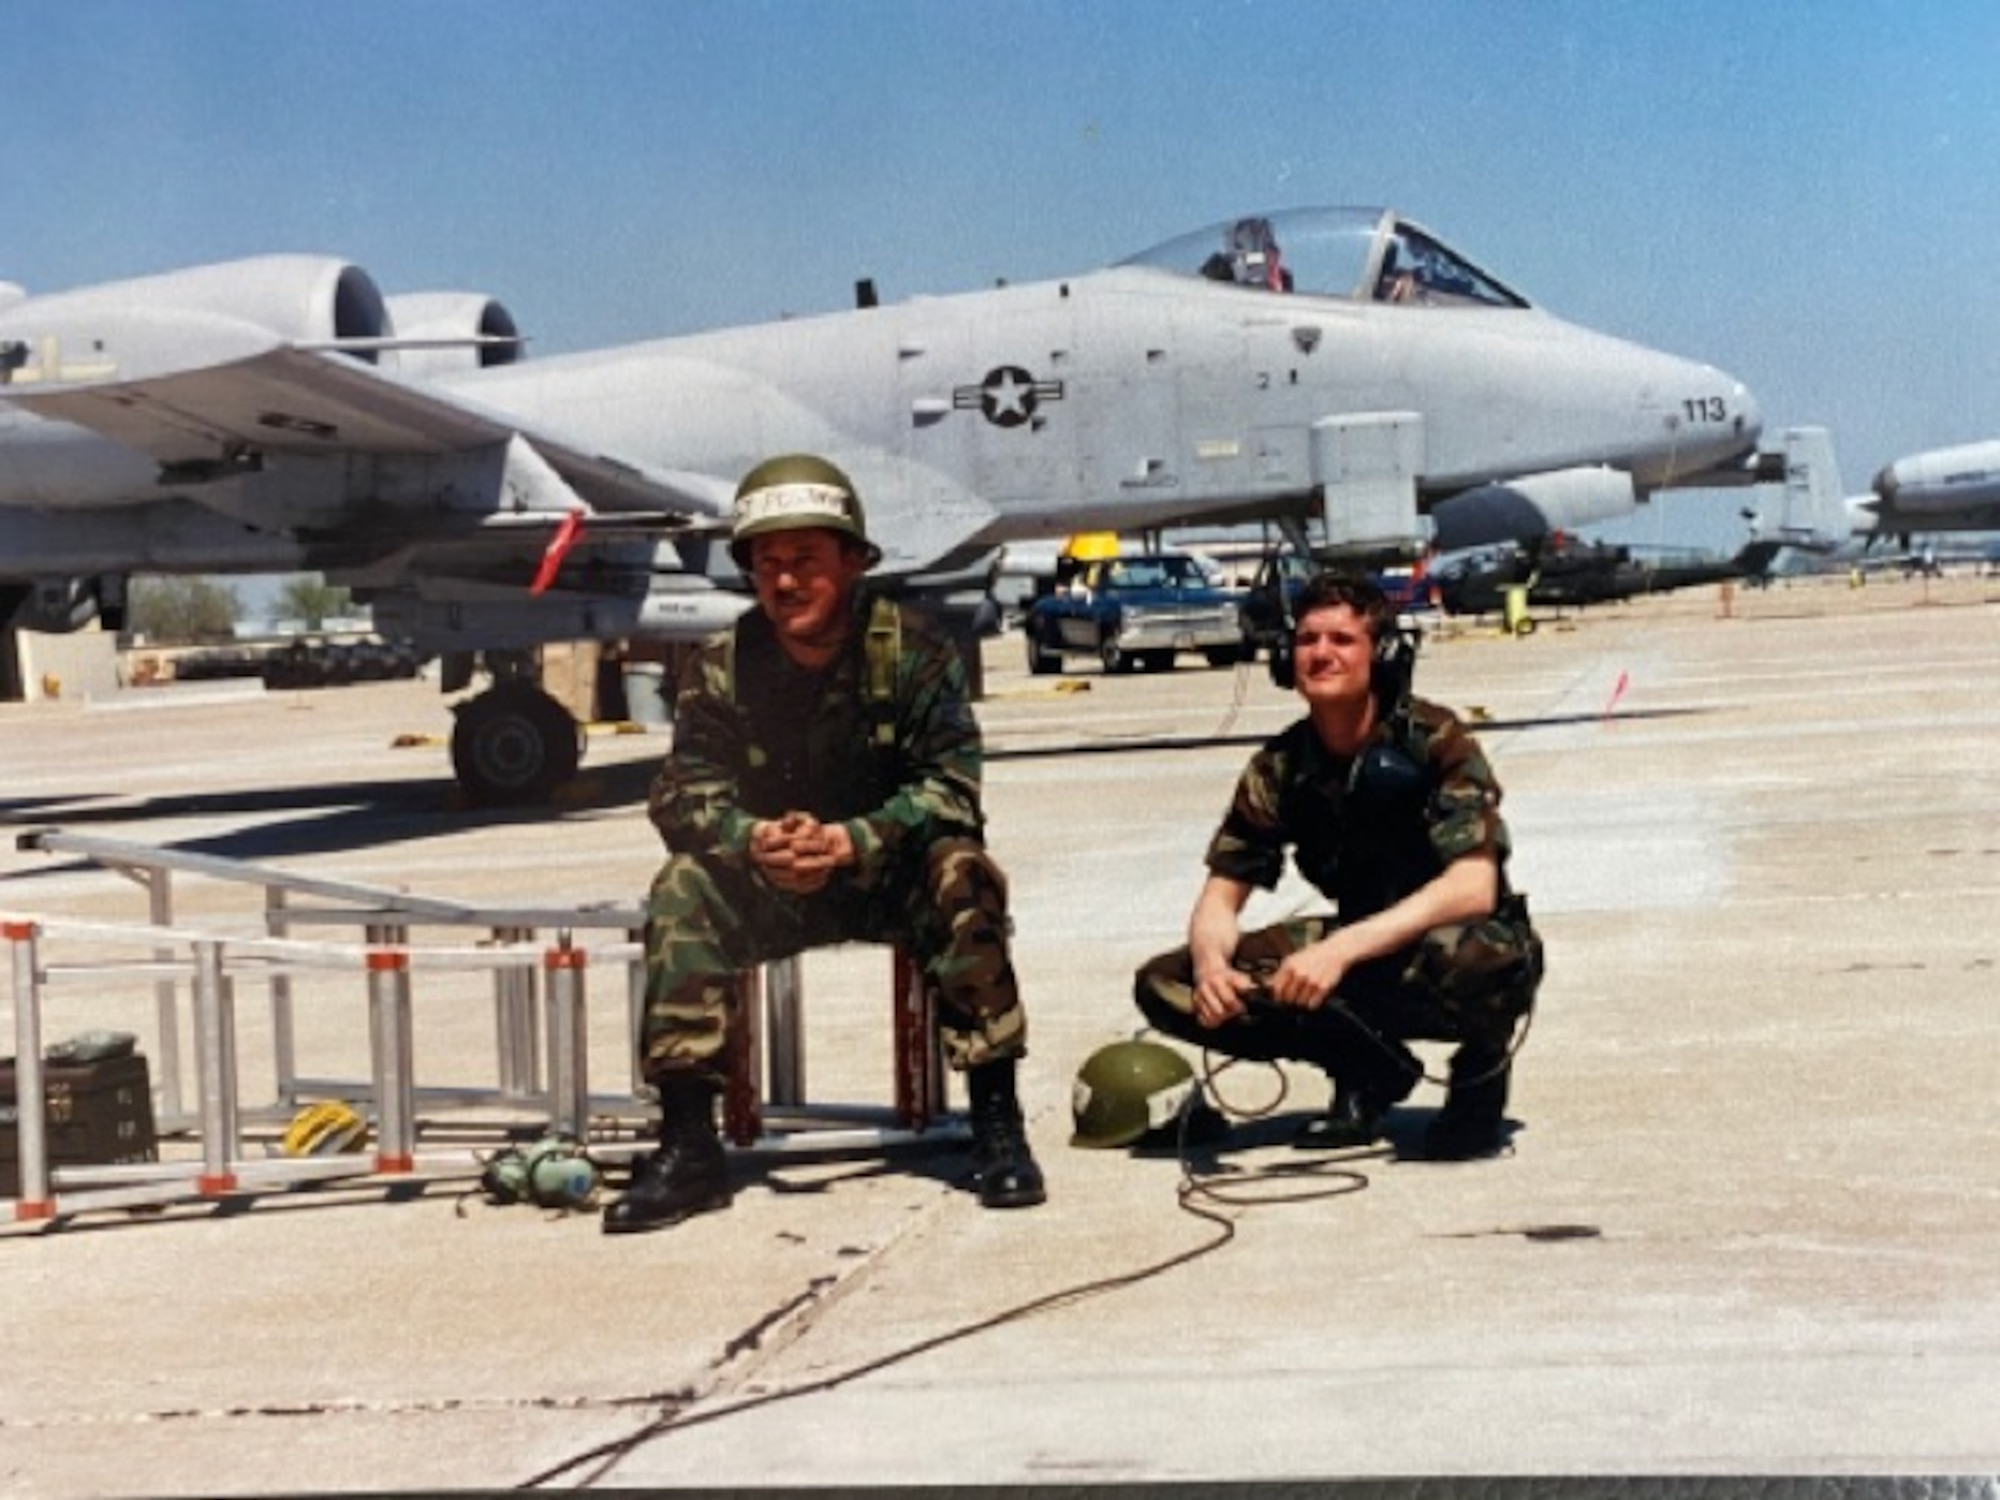 Then Airman Brian Leiter poses in front of an A-10C Thunderbolt II at Whiteman AFB in 1999 as a Crew Chief.